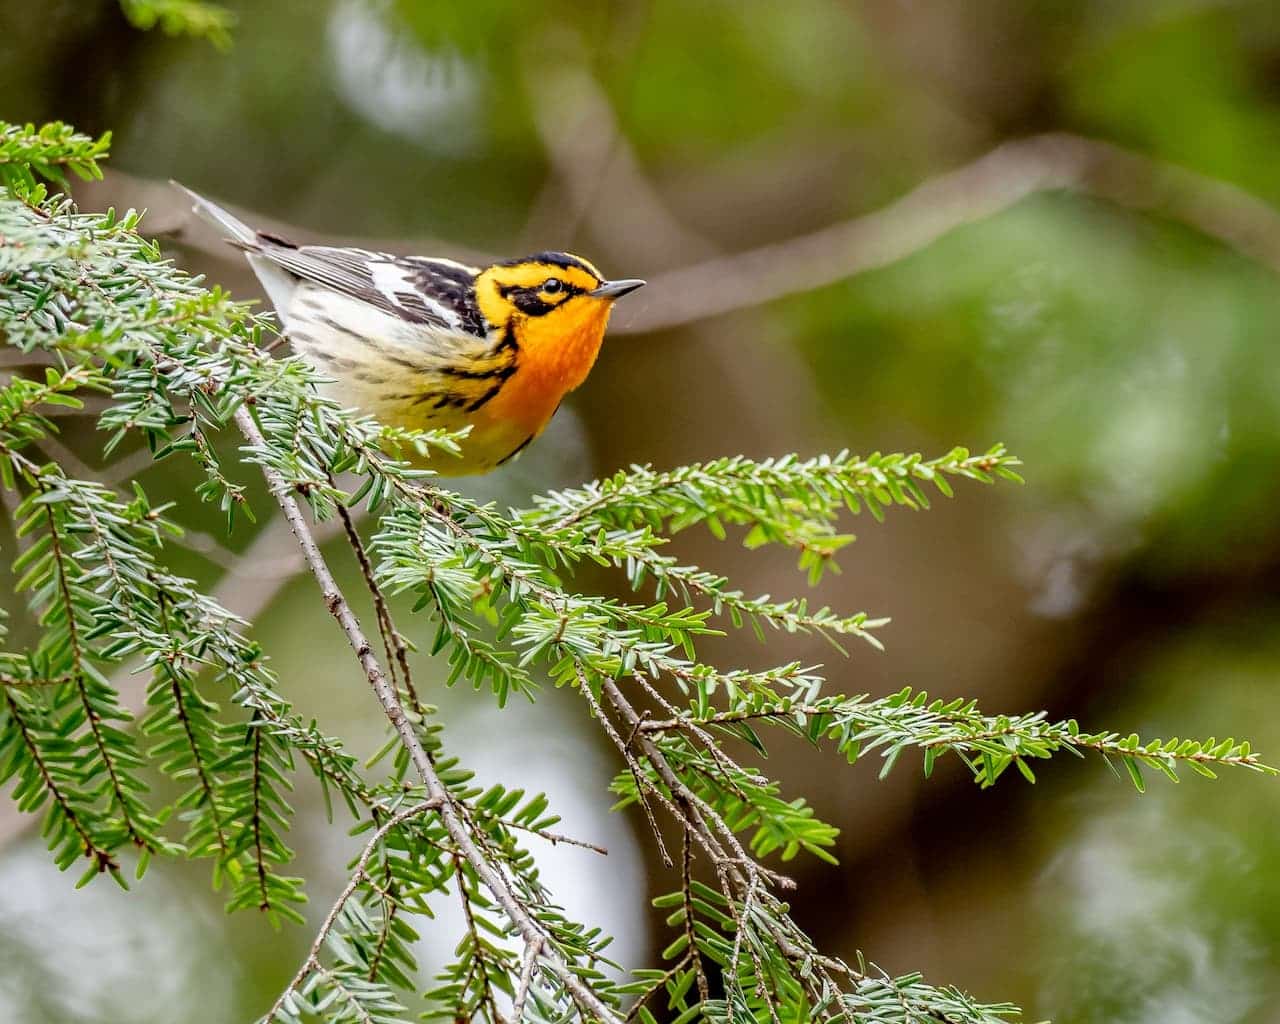 The Blackburnian Warbler Perched On The Branch